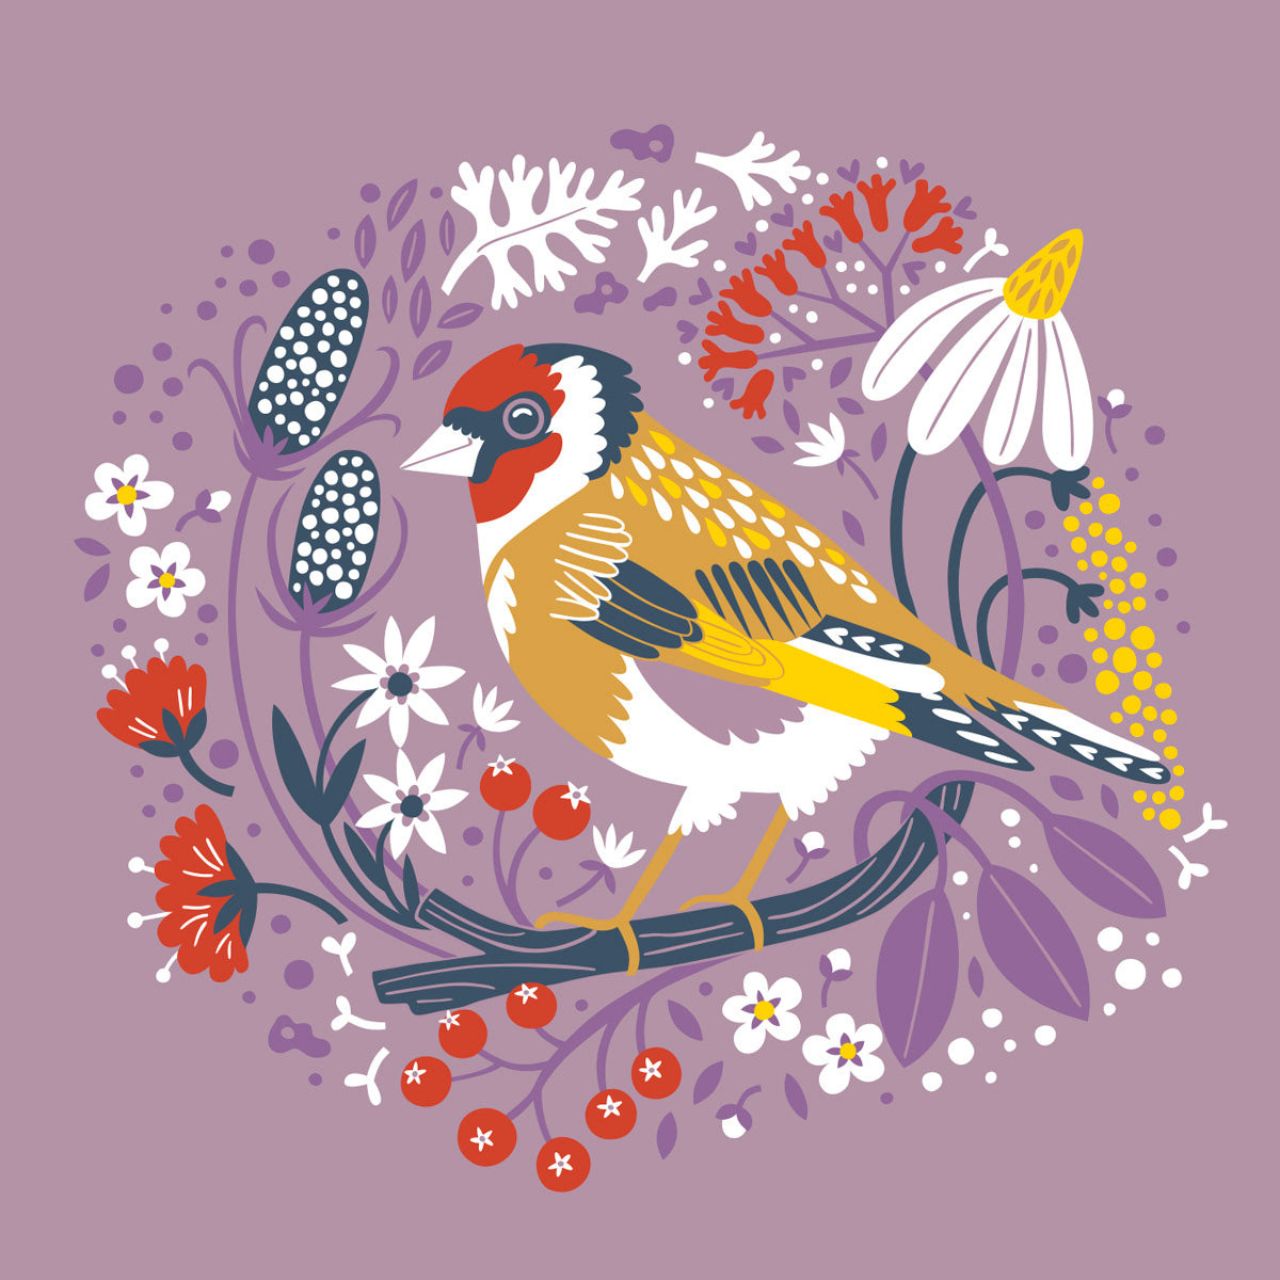 Goldfinch Birdy Cushion by Tipperary Crystal  Goldfinch Tipperary Birdy Cushion by Tipperary Crystal  New to the Tipperary Crystal Birdy Collection, this plush, feather filled 45cm velvet cushion features the exquisite Goldfinch illustration and will make a bright and colourful statement in any home.